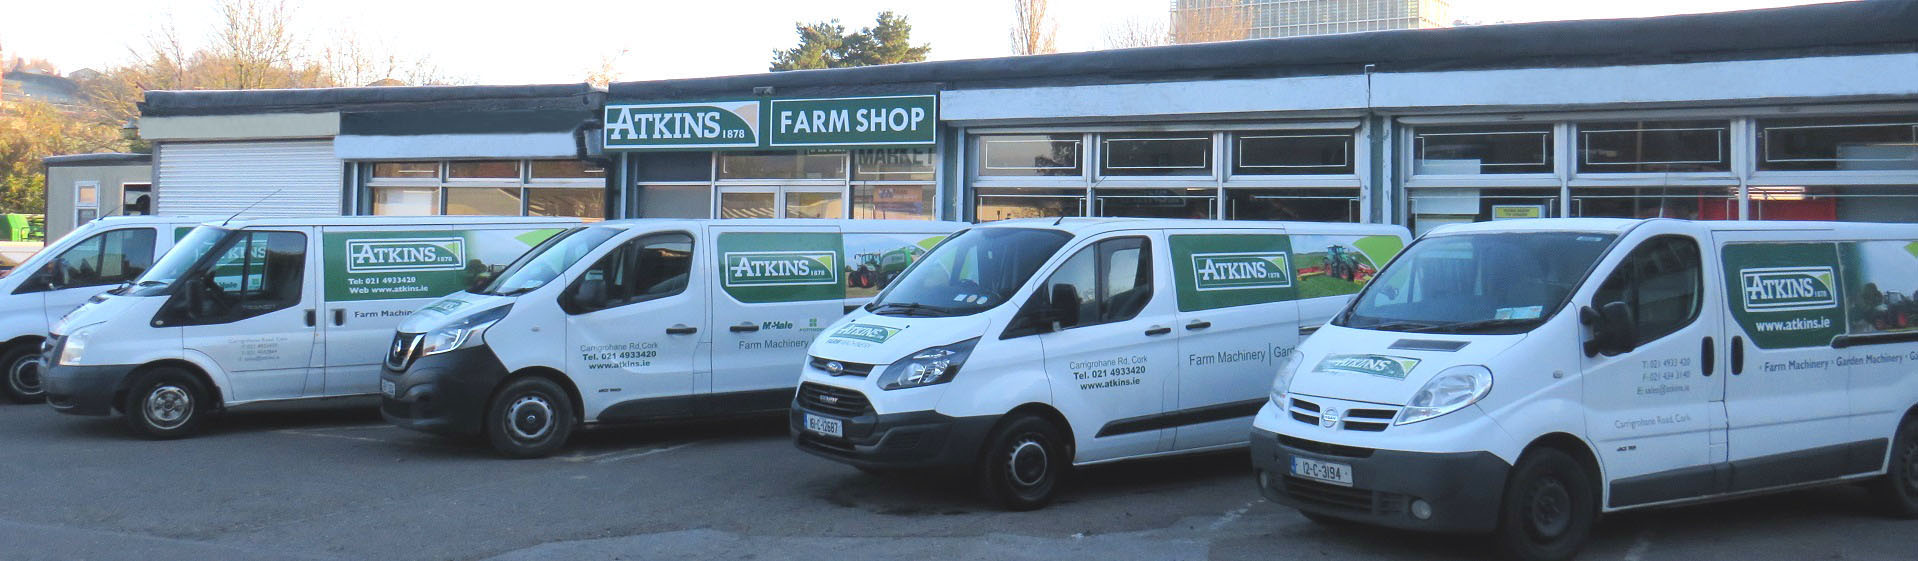 Atkins Vans lined up in front of Atkins Farm Shop on Carrighroane Road